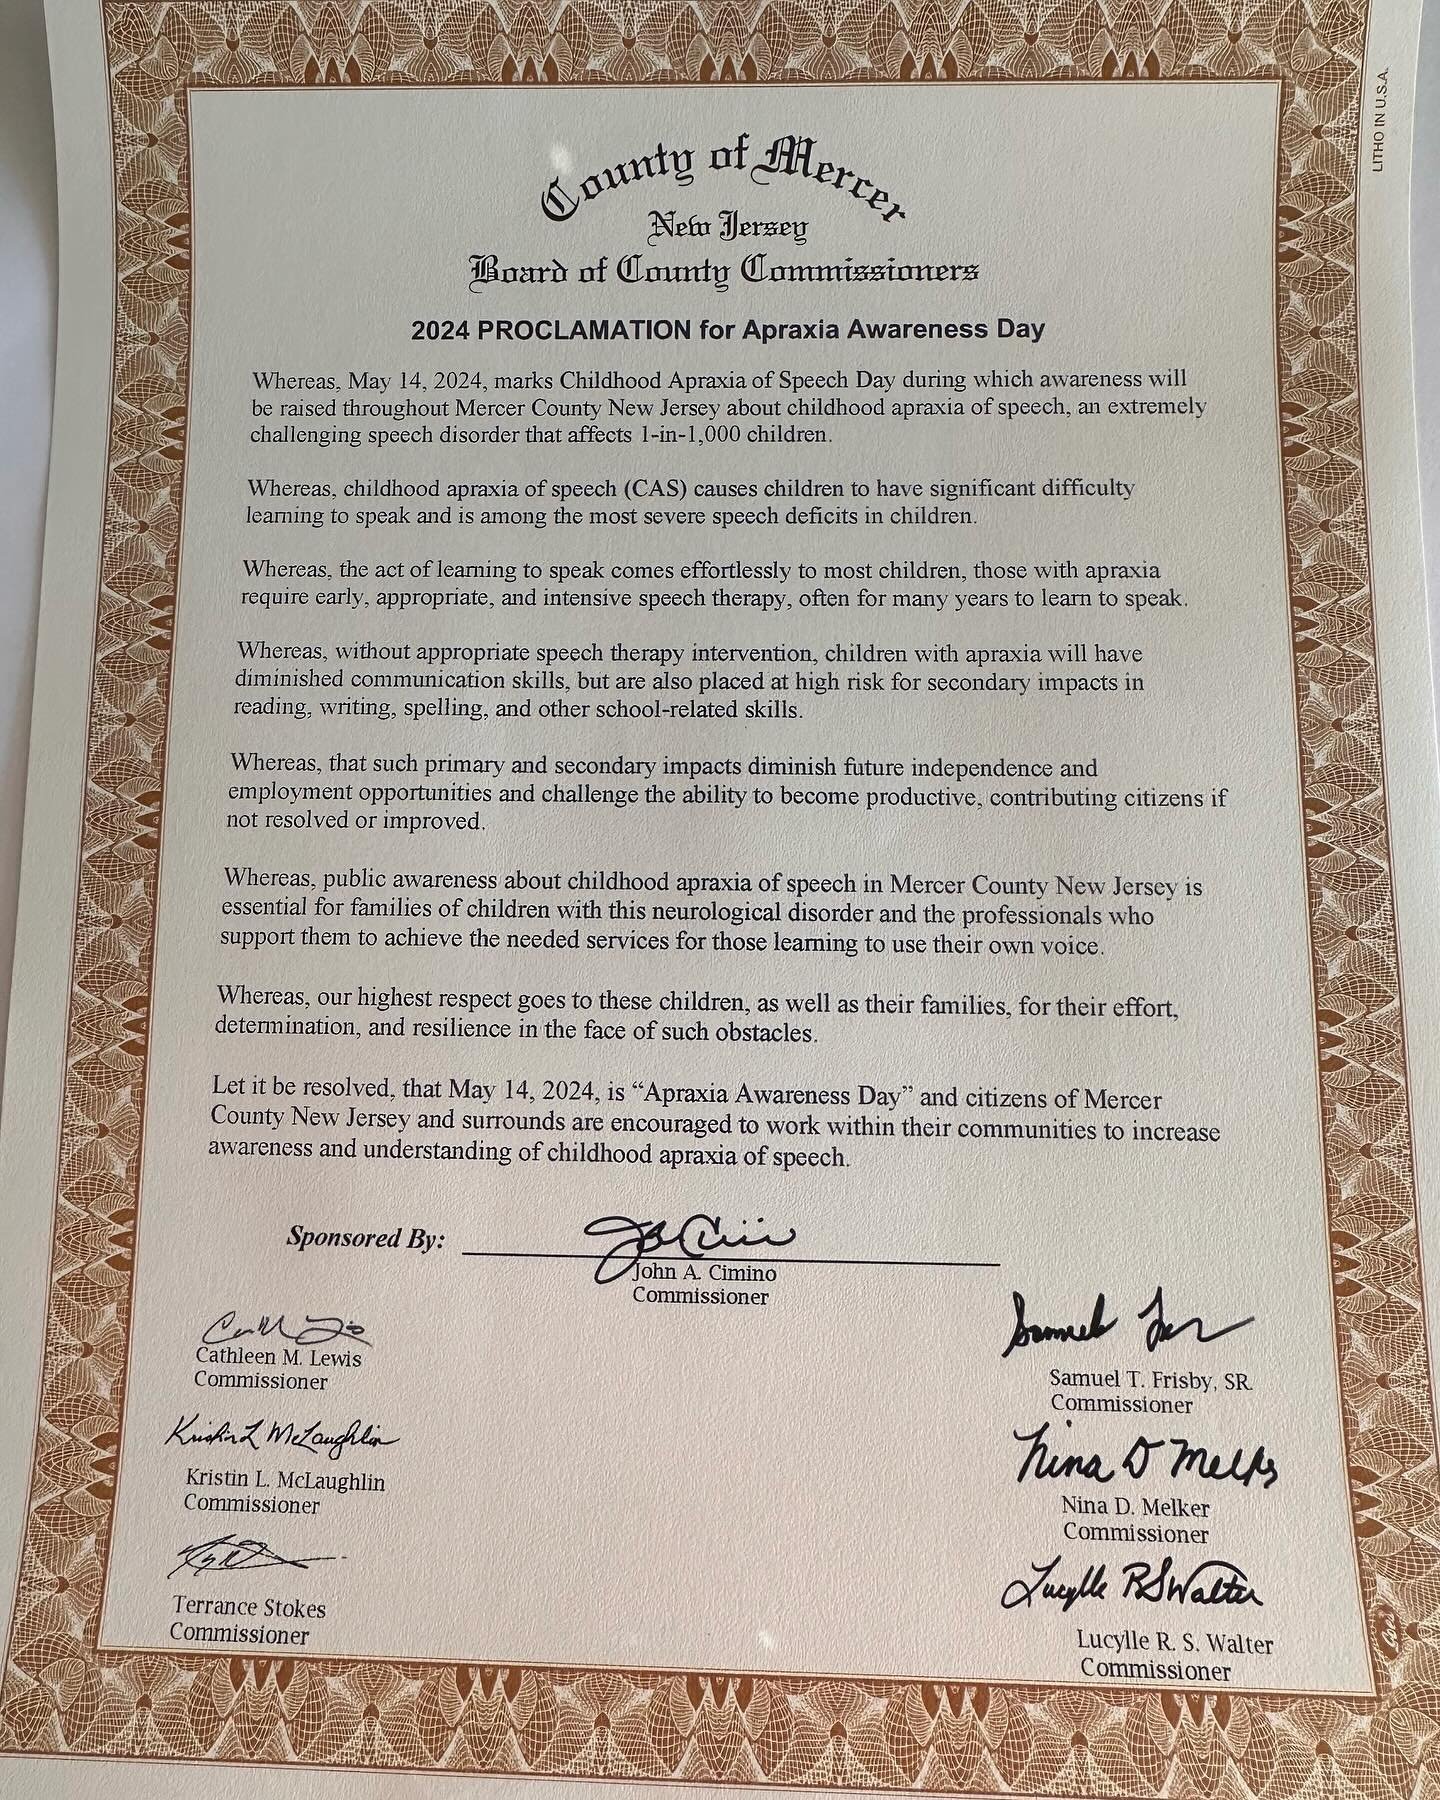 May 14th is Apraxia Awareness Day in Mercer County NJ! Thank you to the Board of County Commissioners for making this possible! #apraxia #apraxiaawareness #apraxiaawarenessday #slp @apraxiakids #childhoodapraxiaofspeech